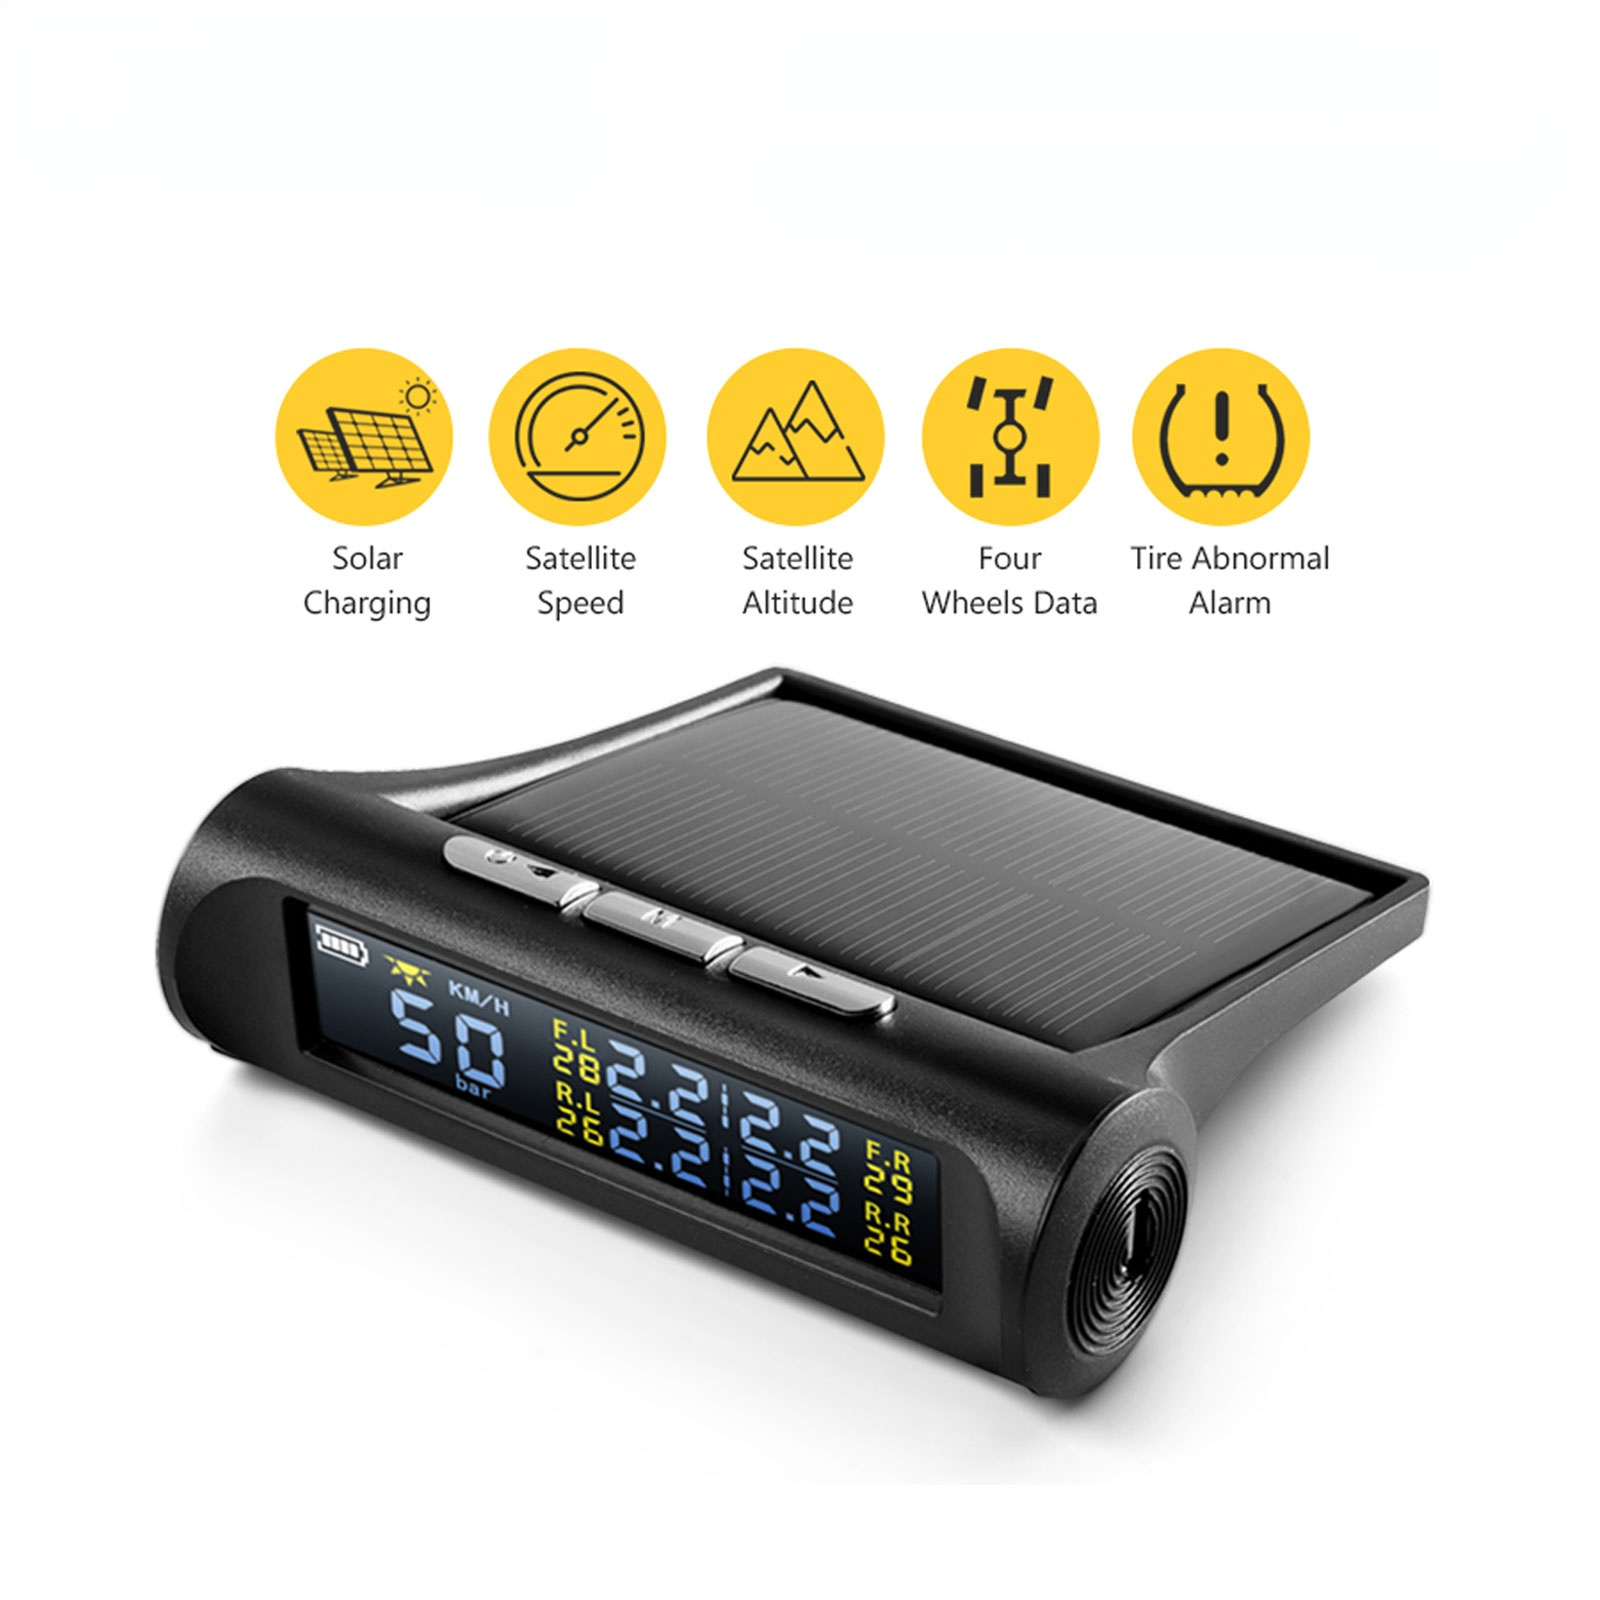 AUTOOL TW500 Car TPMS Tyre Pressure Monitoring System Solar Power Digital LCD Display Auto Security Alarm Systems Tyre Pressure